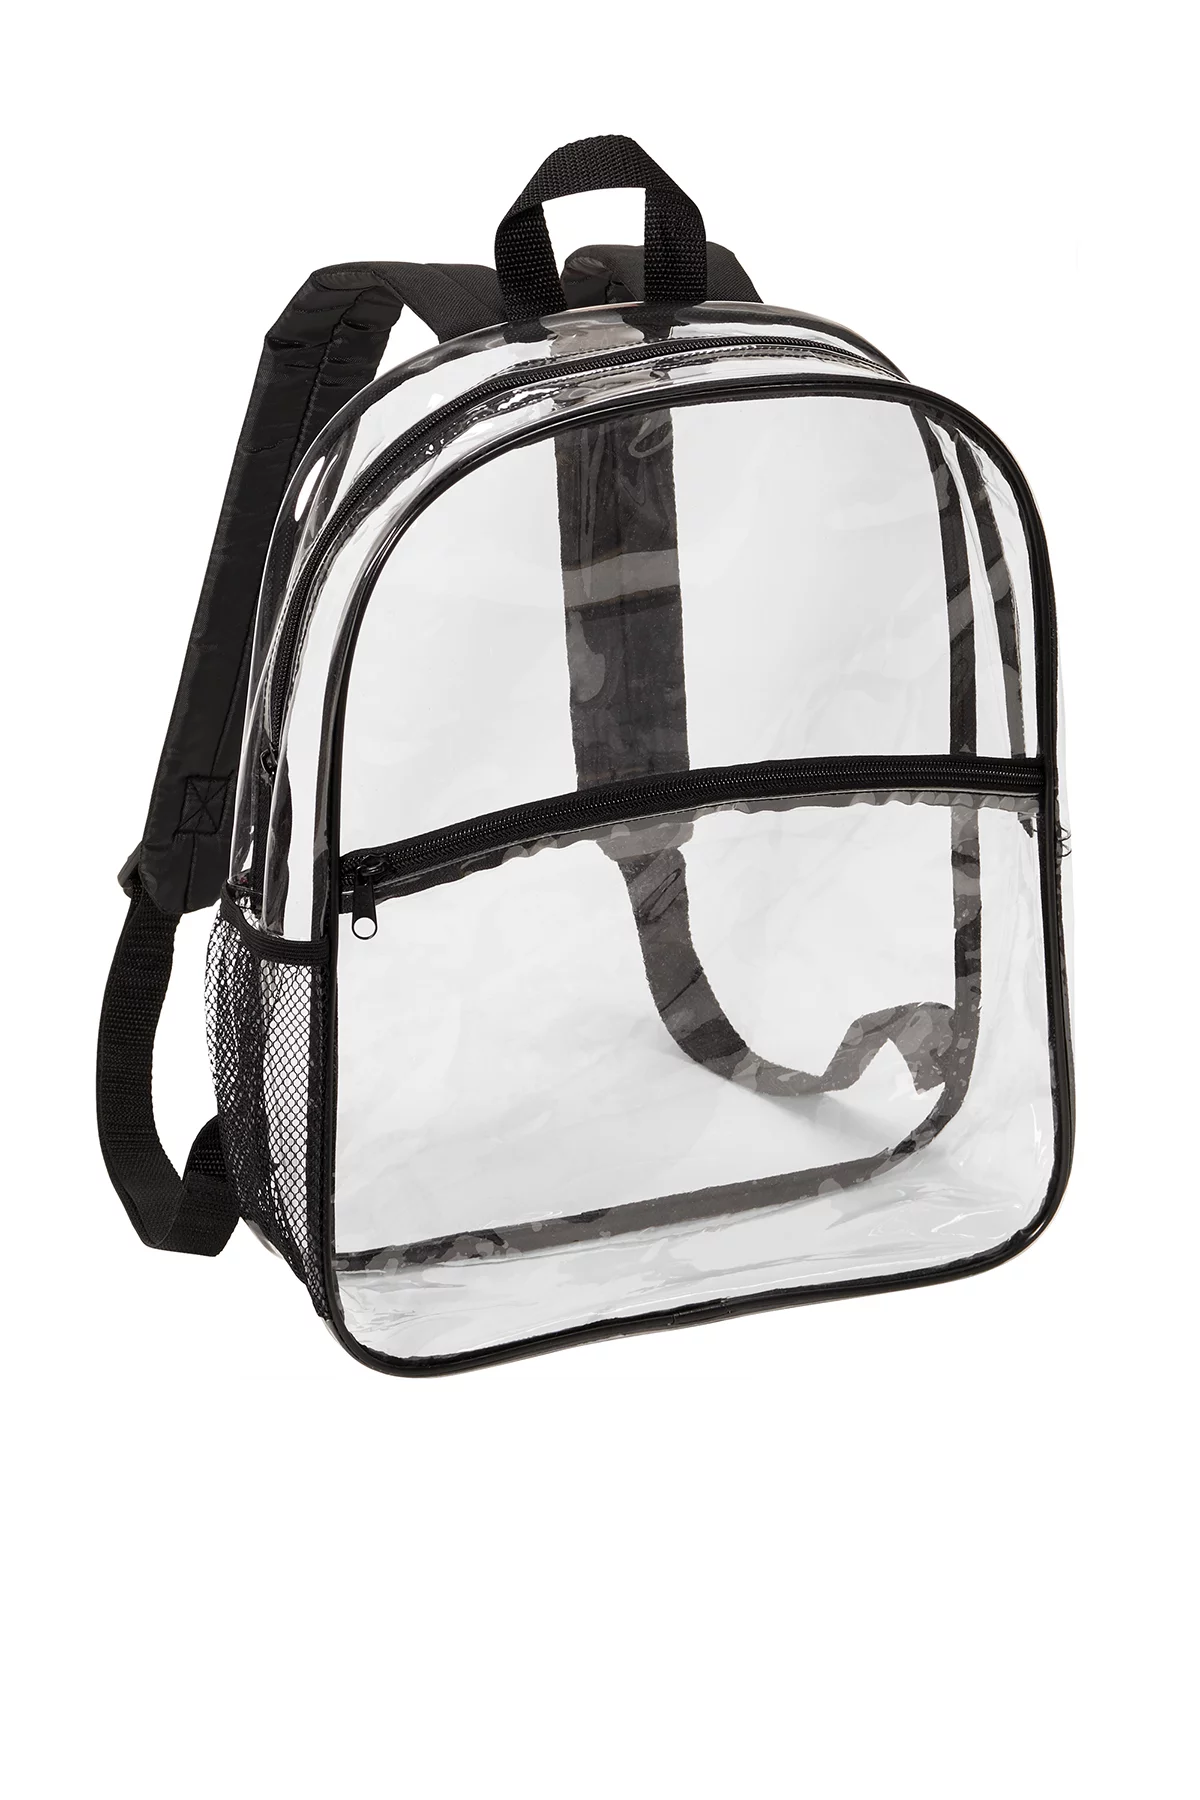 Clear Handbags Clear Drawstring Waterproof Backpack Bags for Concert & Stadium Sporting Events Transparent Draw String Bags Travel Shoe Bags Pack of 2